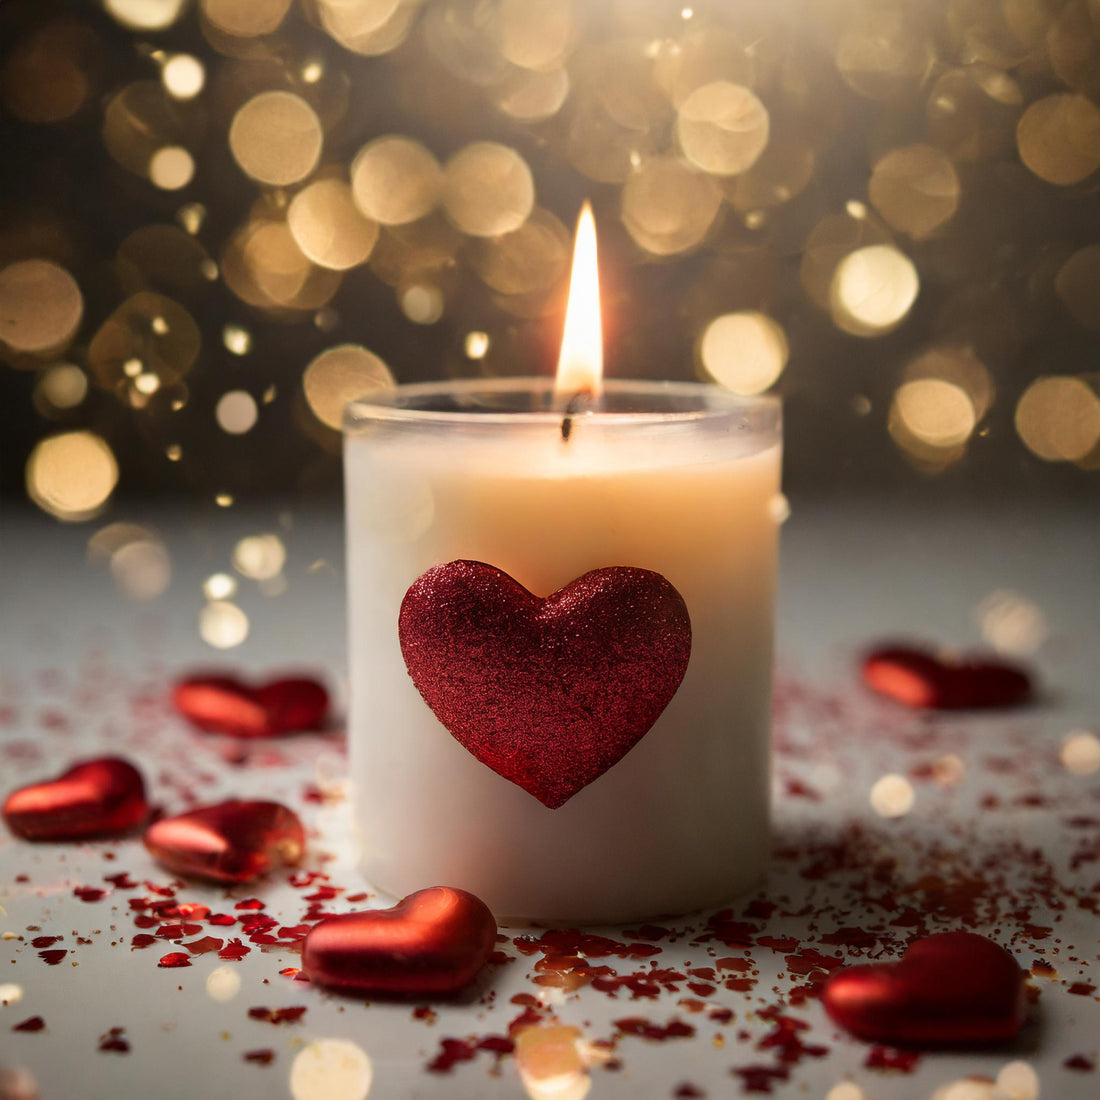 Sparkling firefly effect behind a white lit candle in a clear with bright red puffed hearts and glittler around it and one stuck onto the candle.